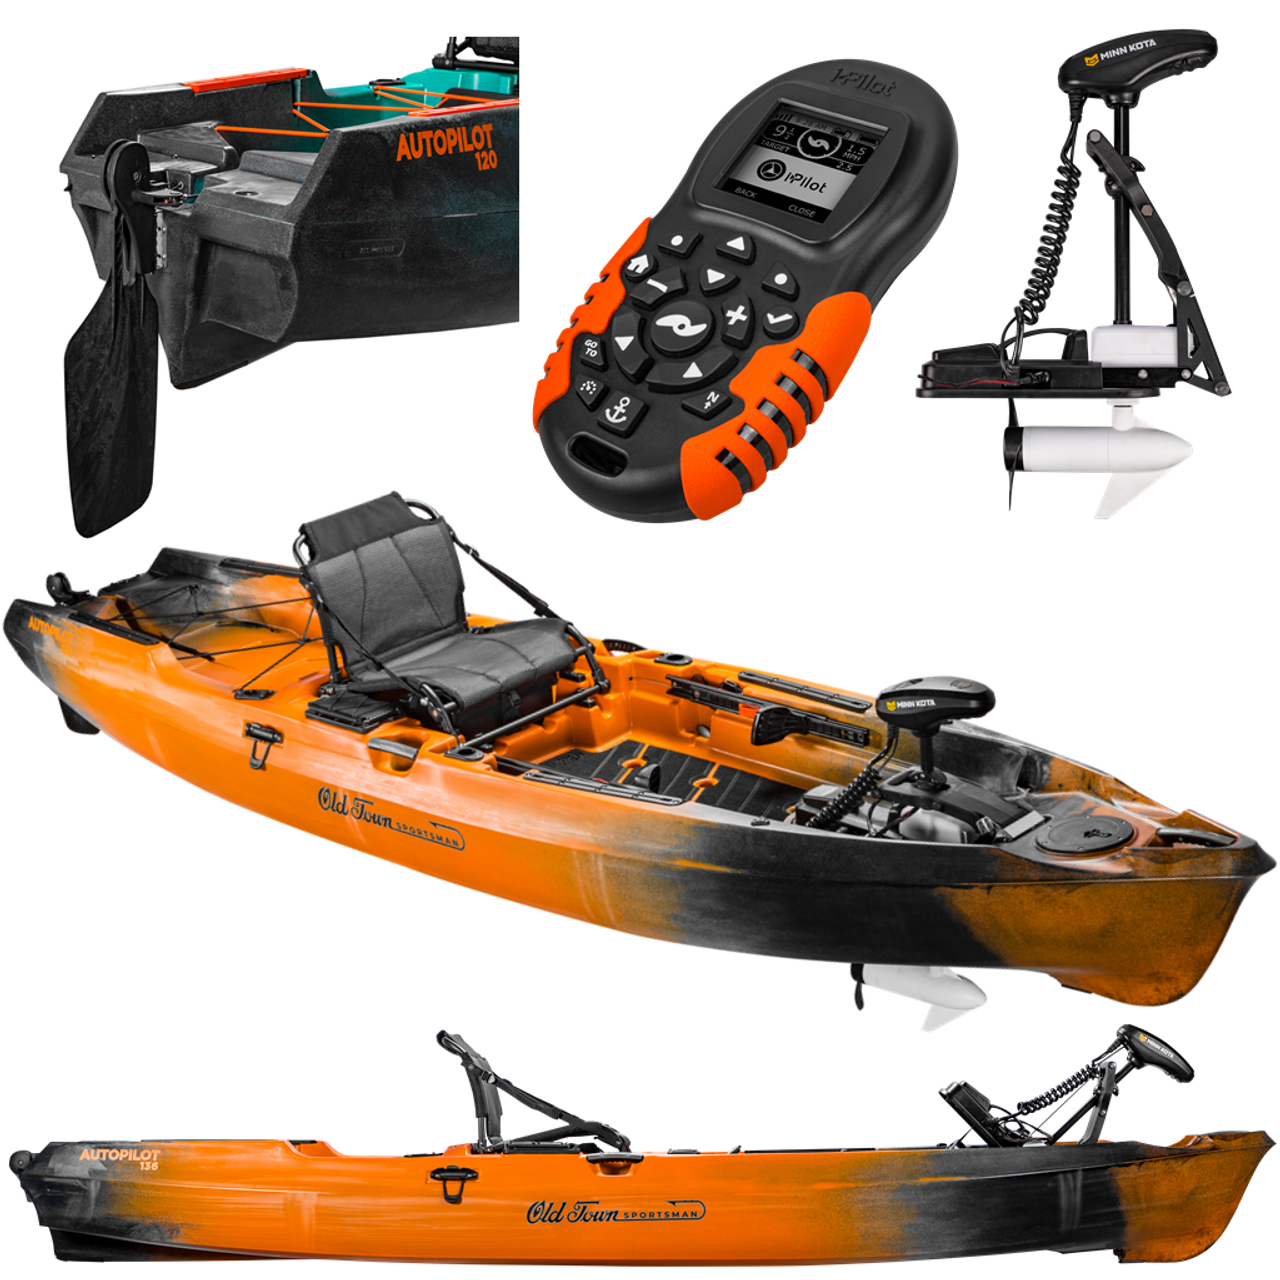 https://cdn11.bigcommerce.com/s-f3xbgyp2hq/images/stencil/1280w/products/2597/20980/Old_Town_Sportsman_Auto_Pilot_136_Motorized_Fishing_Kayak_Collage_Kayak_City_Ember_Camo__87056.1696979114.png